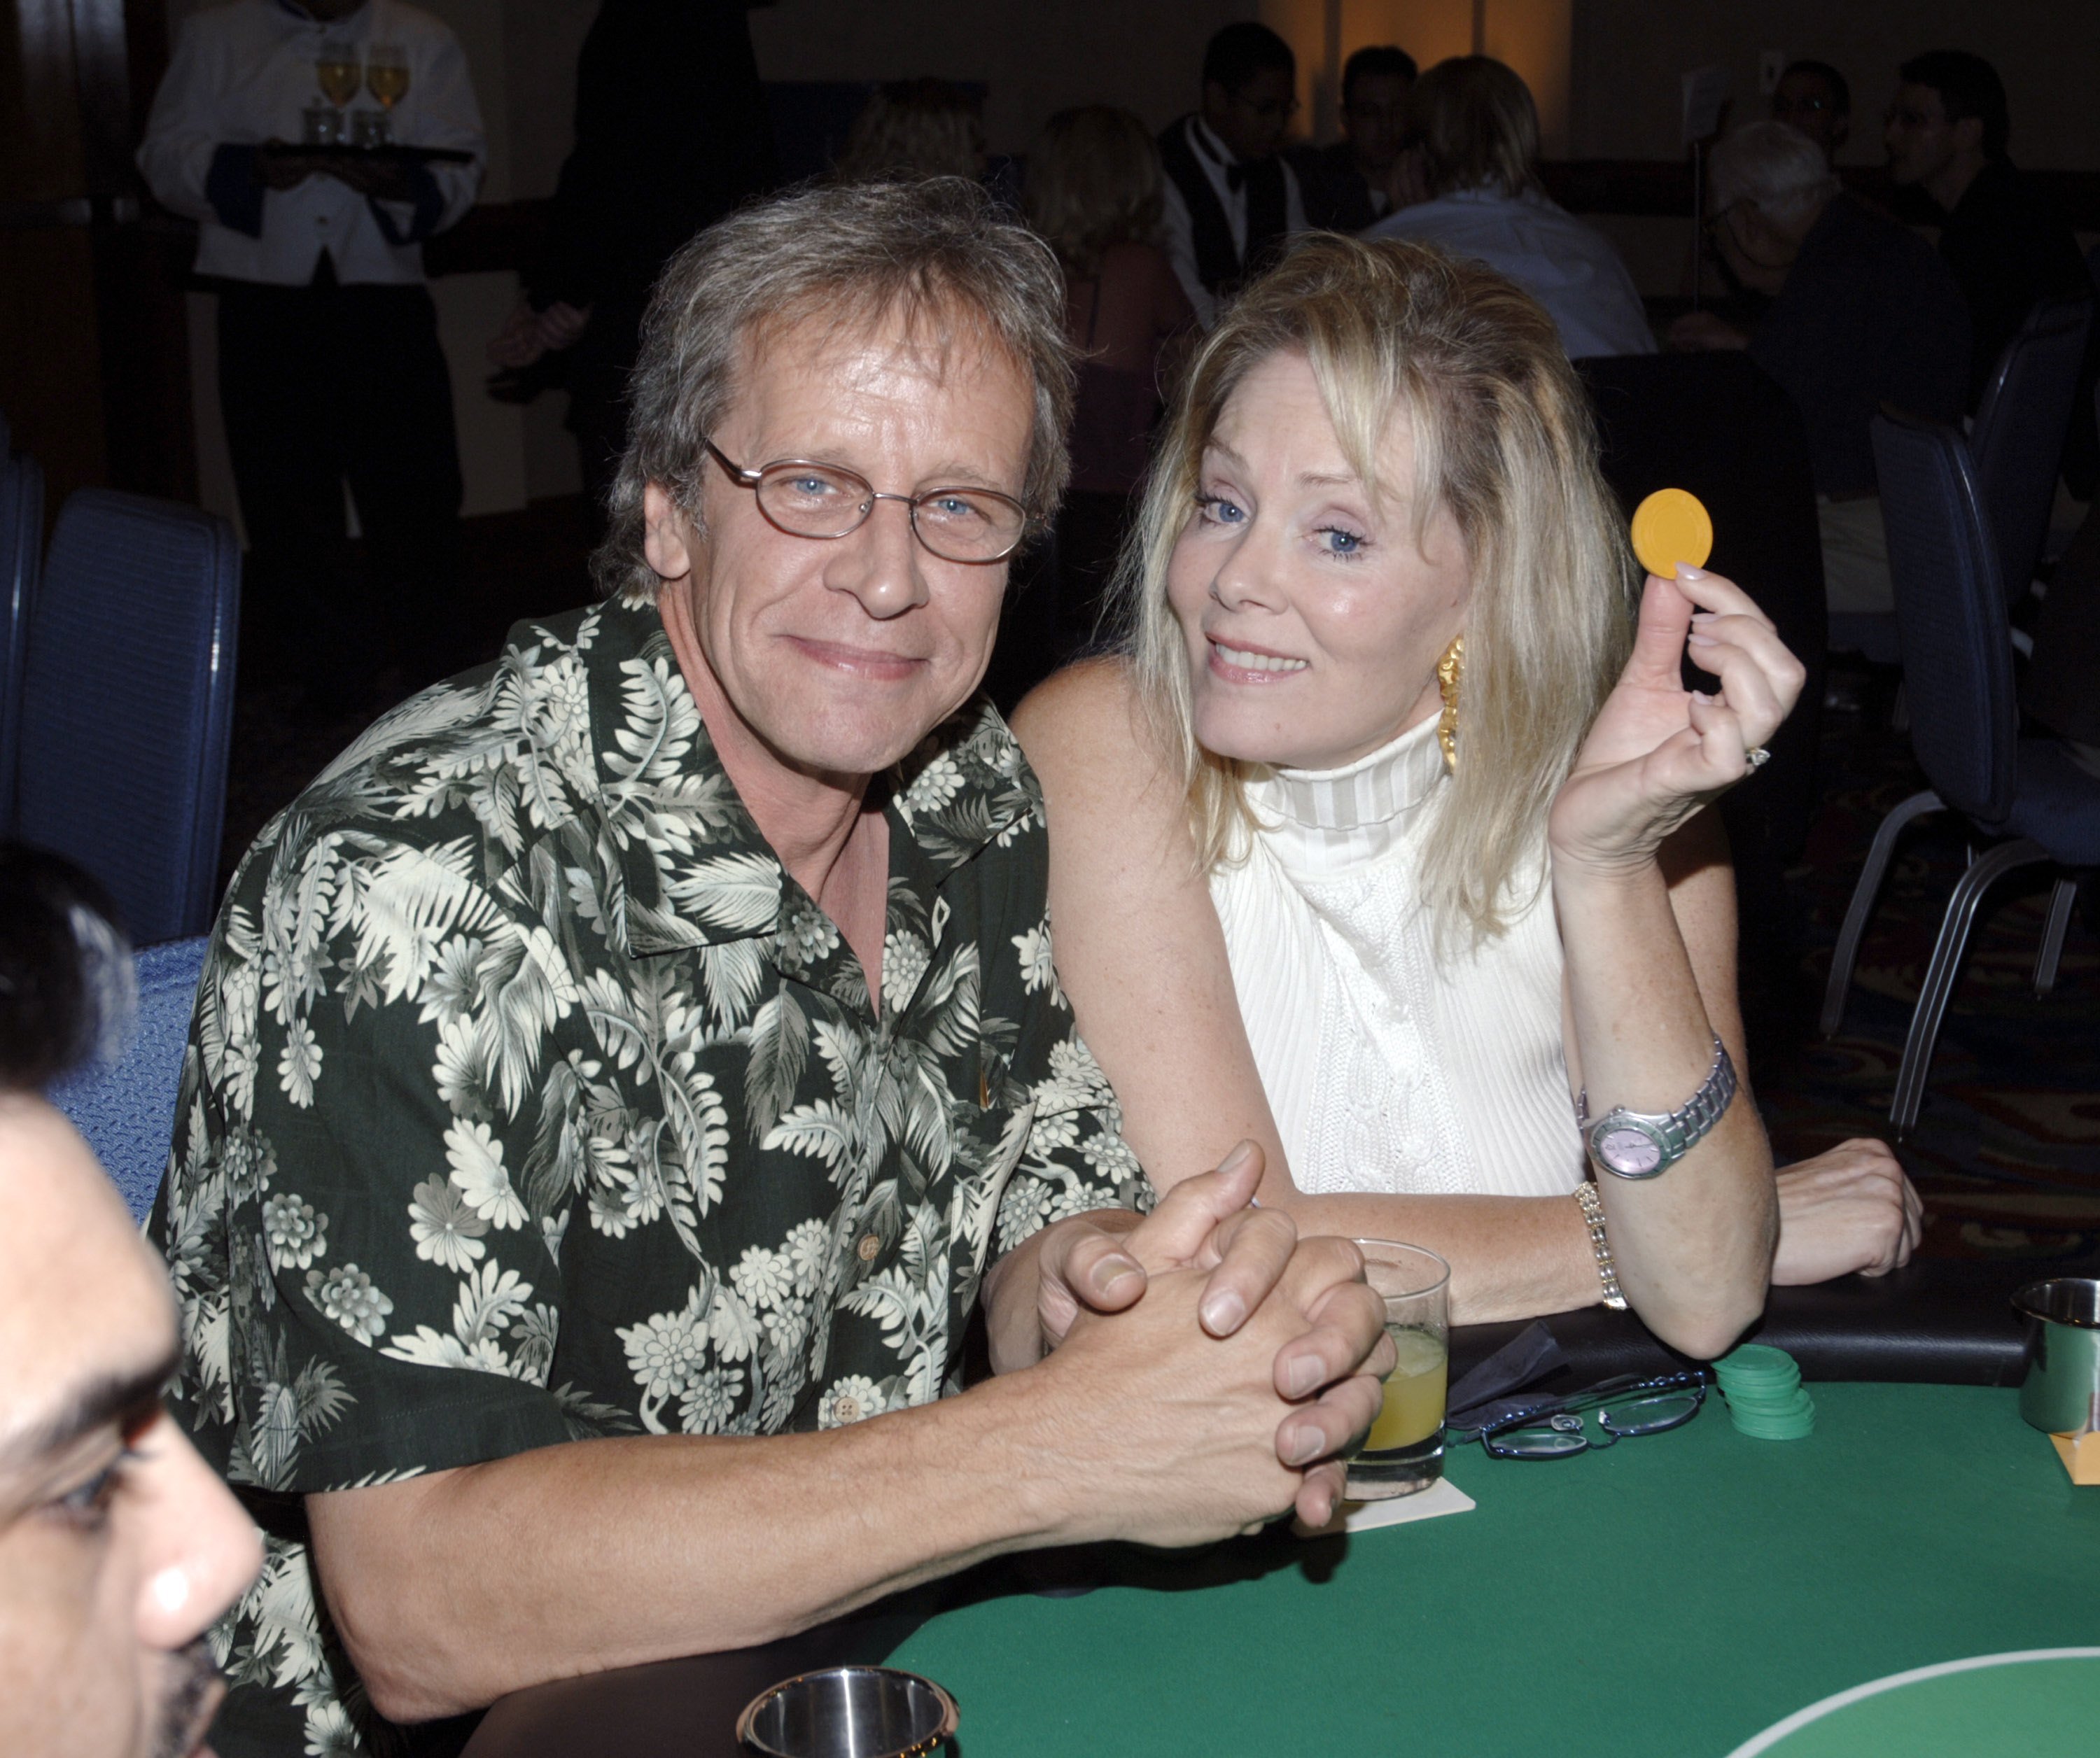  Richard Gilliland and Jean Smart attend the Texas Hold'Em Casino Night Fundraiser for the Caucus Foundation on August 19, 2006. | Photo: Getty Images